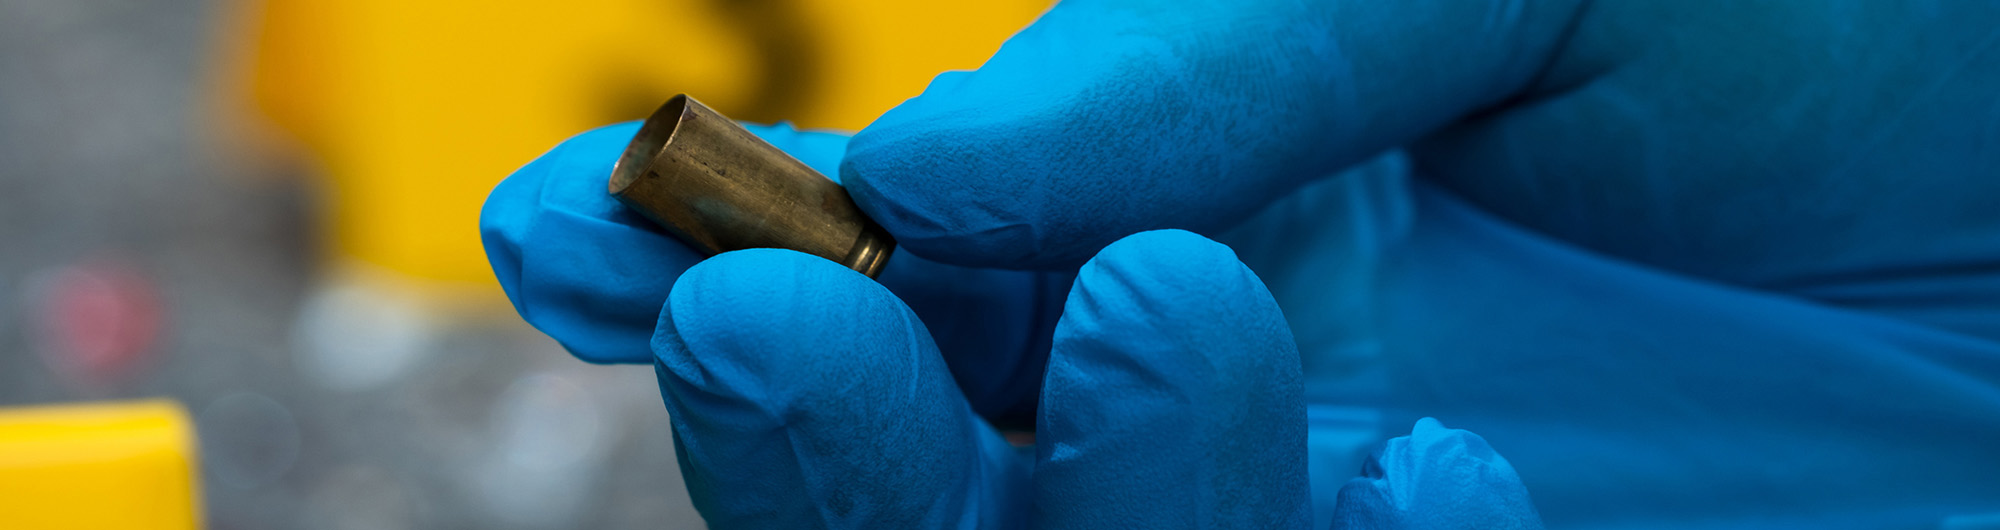 Image of a gloved hand holding a bullet casing 